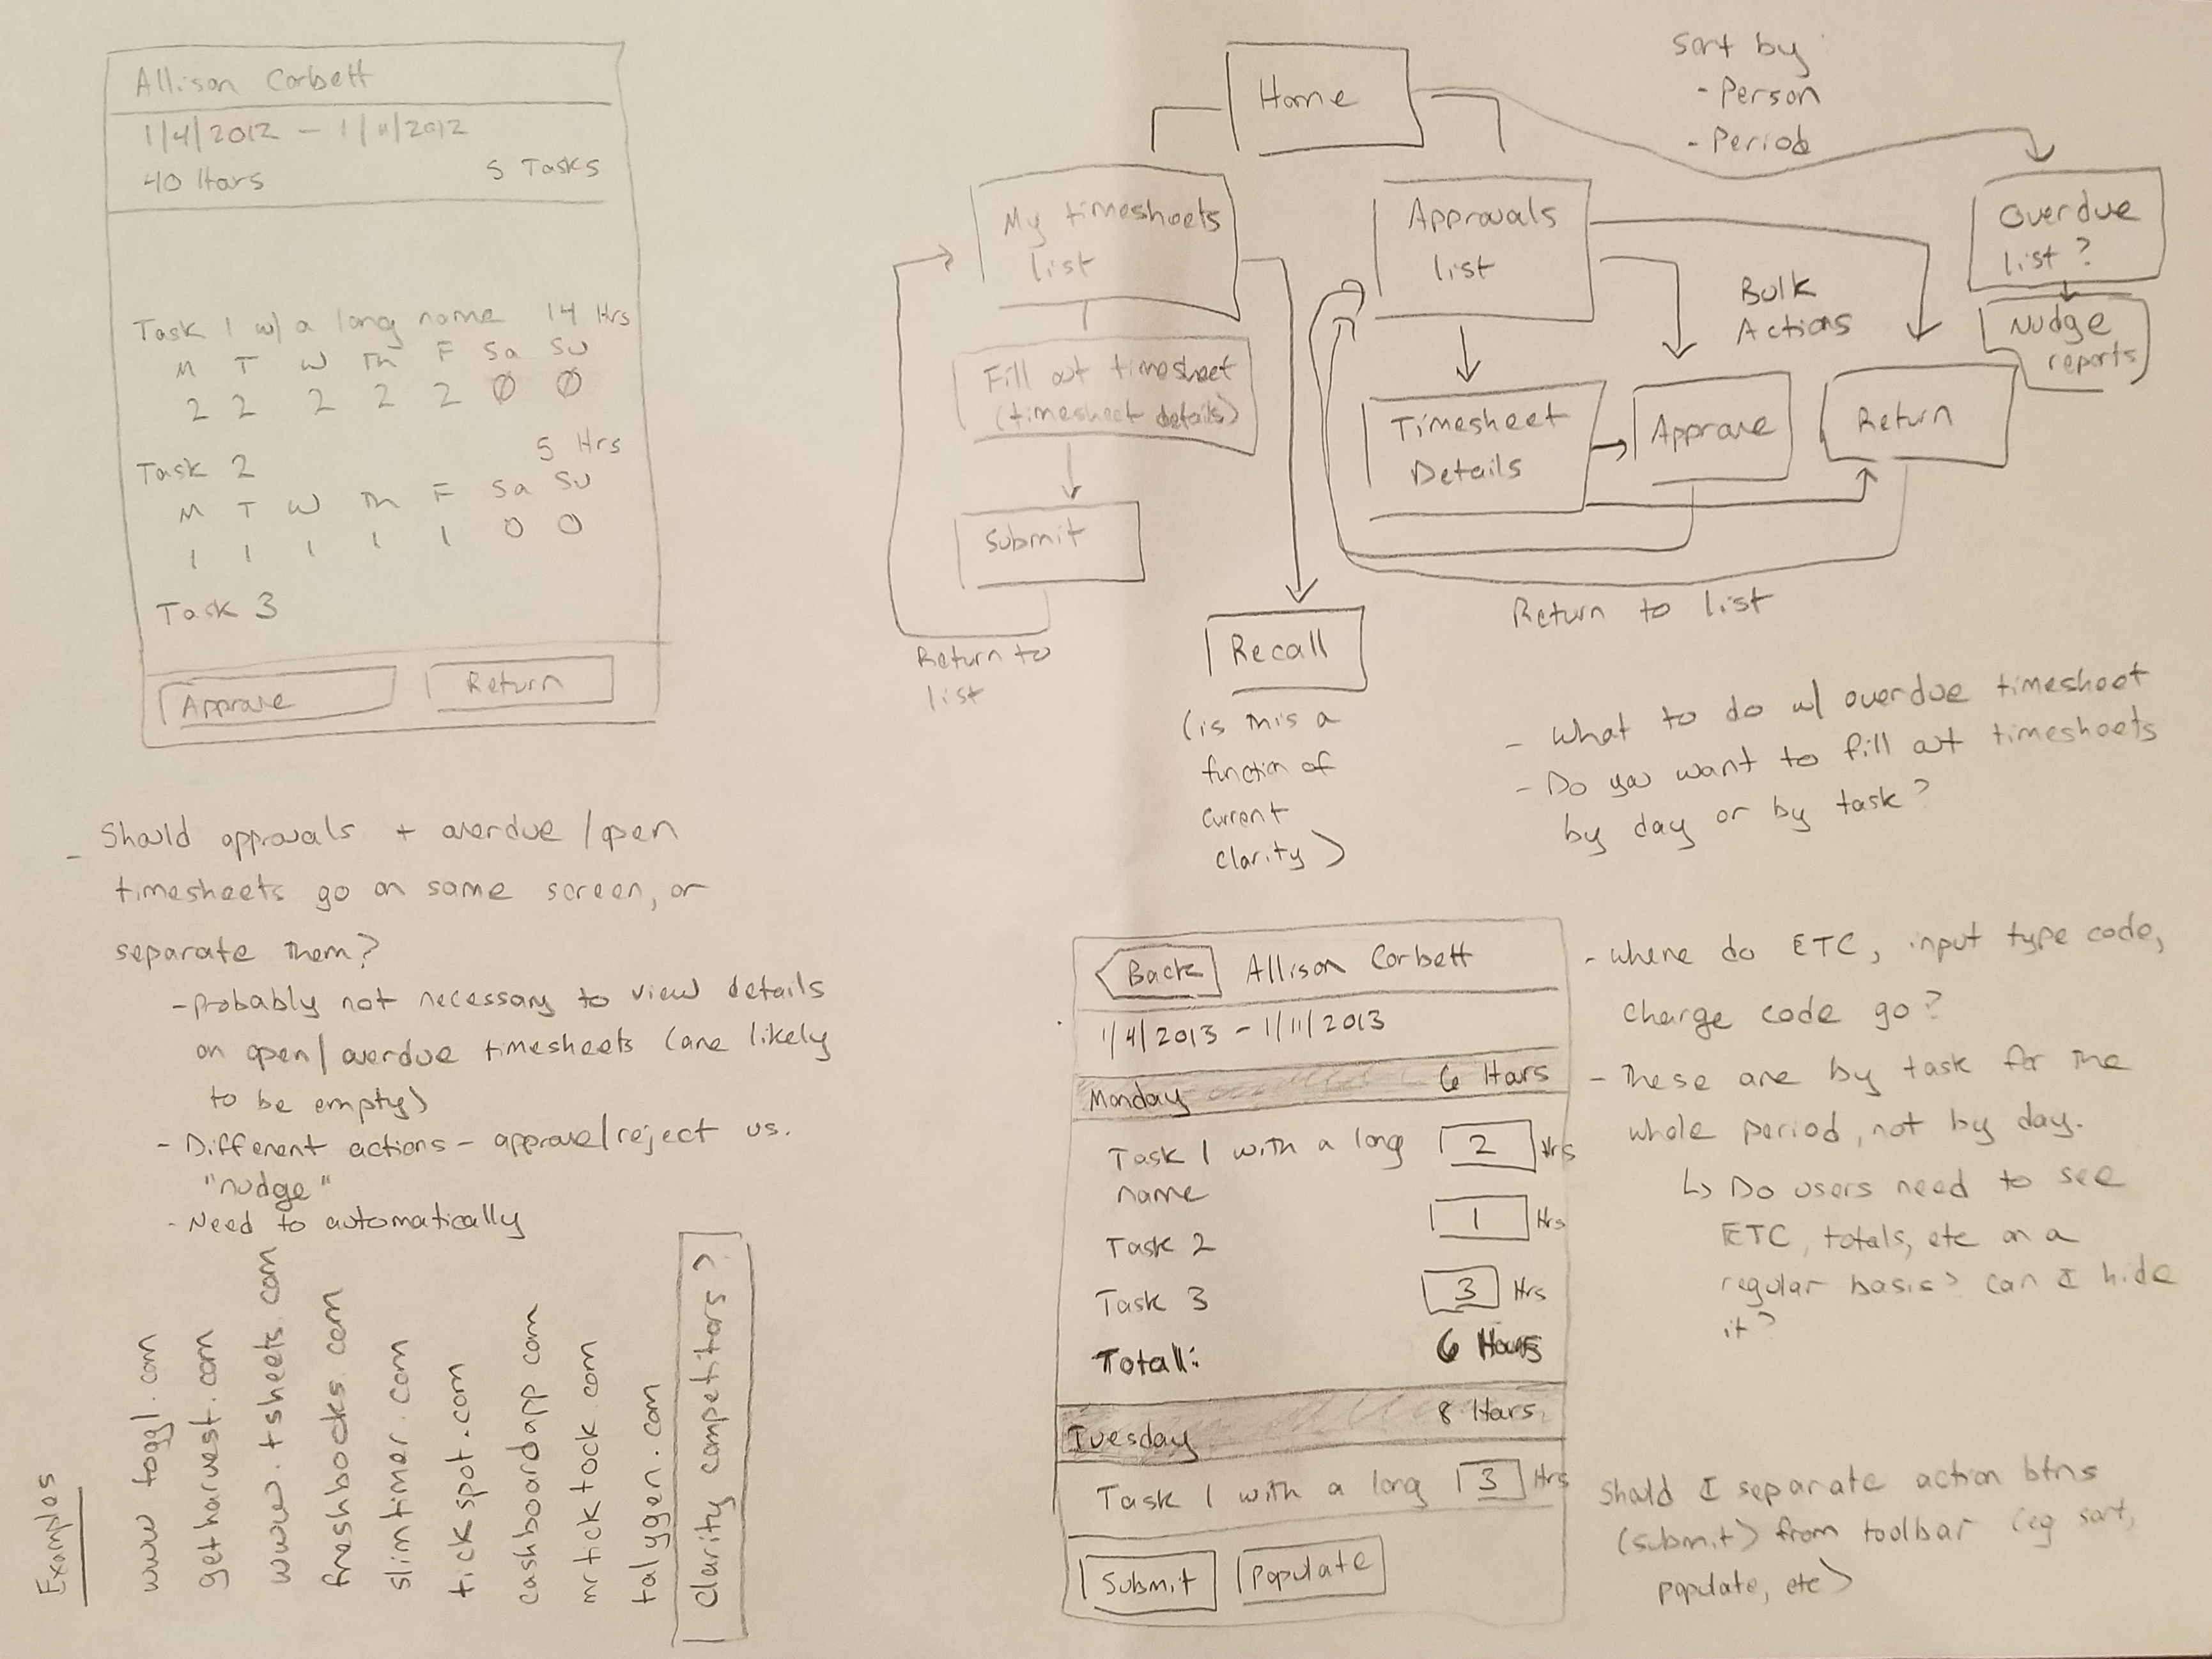 This page from my sketchbook shows me working through the submitter workflow and exploring ideas for screens. This is typical of my brainstorming process: some drawings, some ideas, and lots of questions! The bottom left is a brainstormed list of comparative apps to analyze.